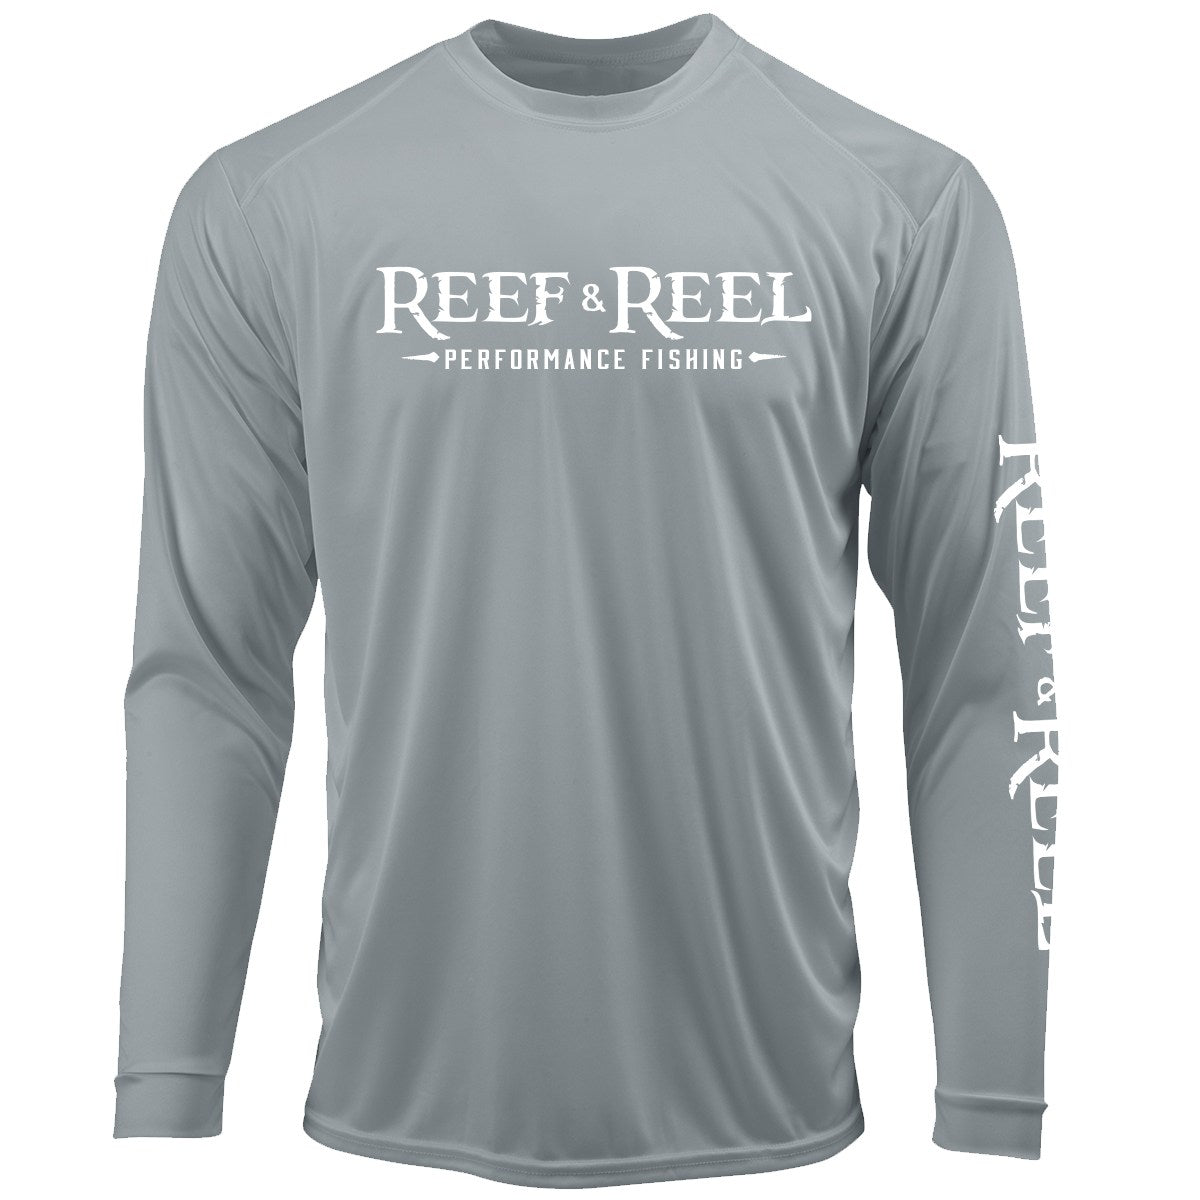 Reef & Reel Performance Fishing Long Sleeve Shirt Best Quality At   - The Best Choice For All the people